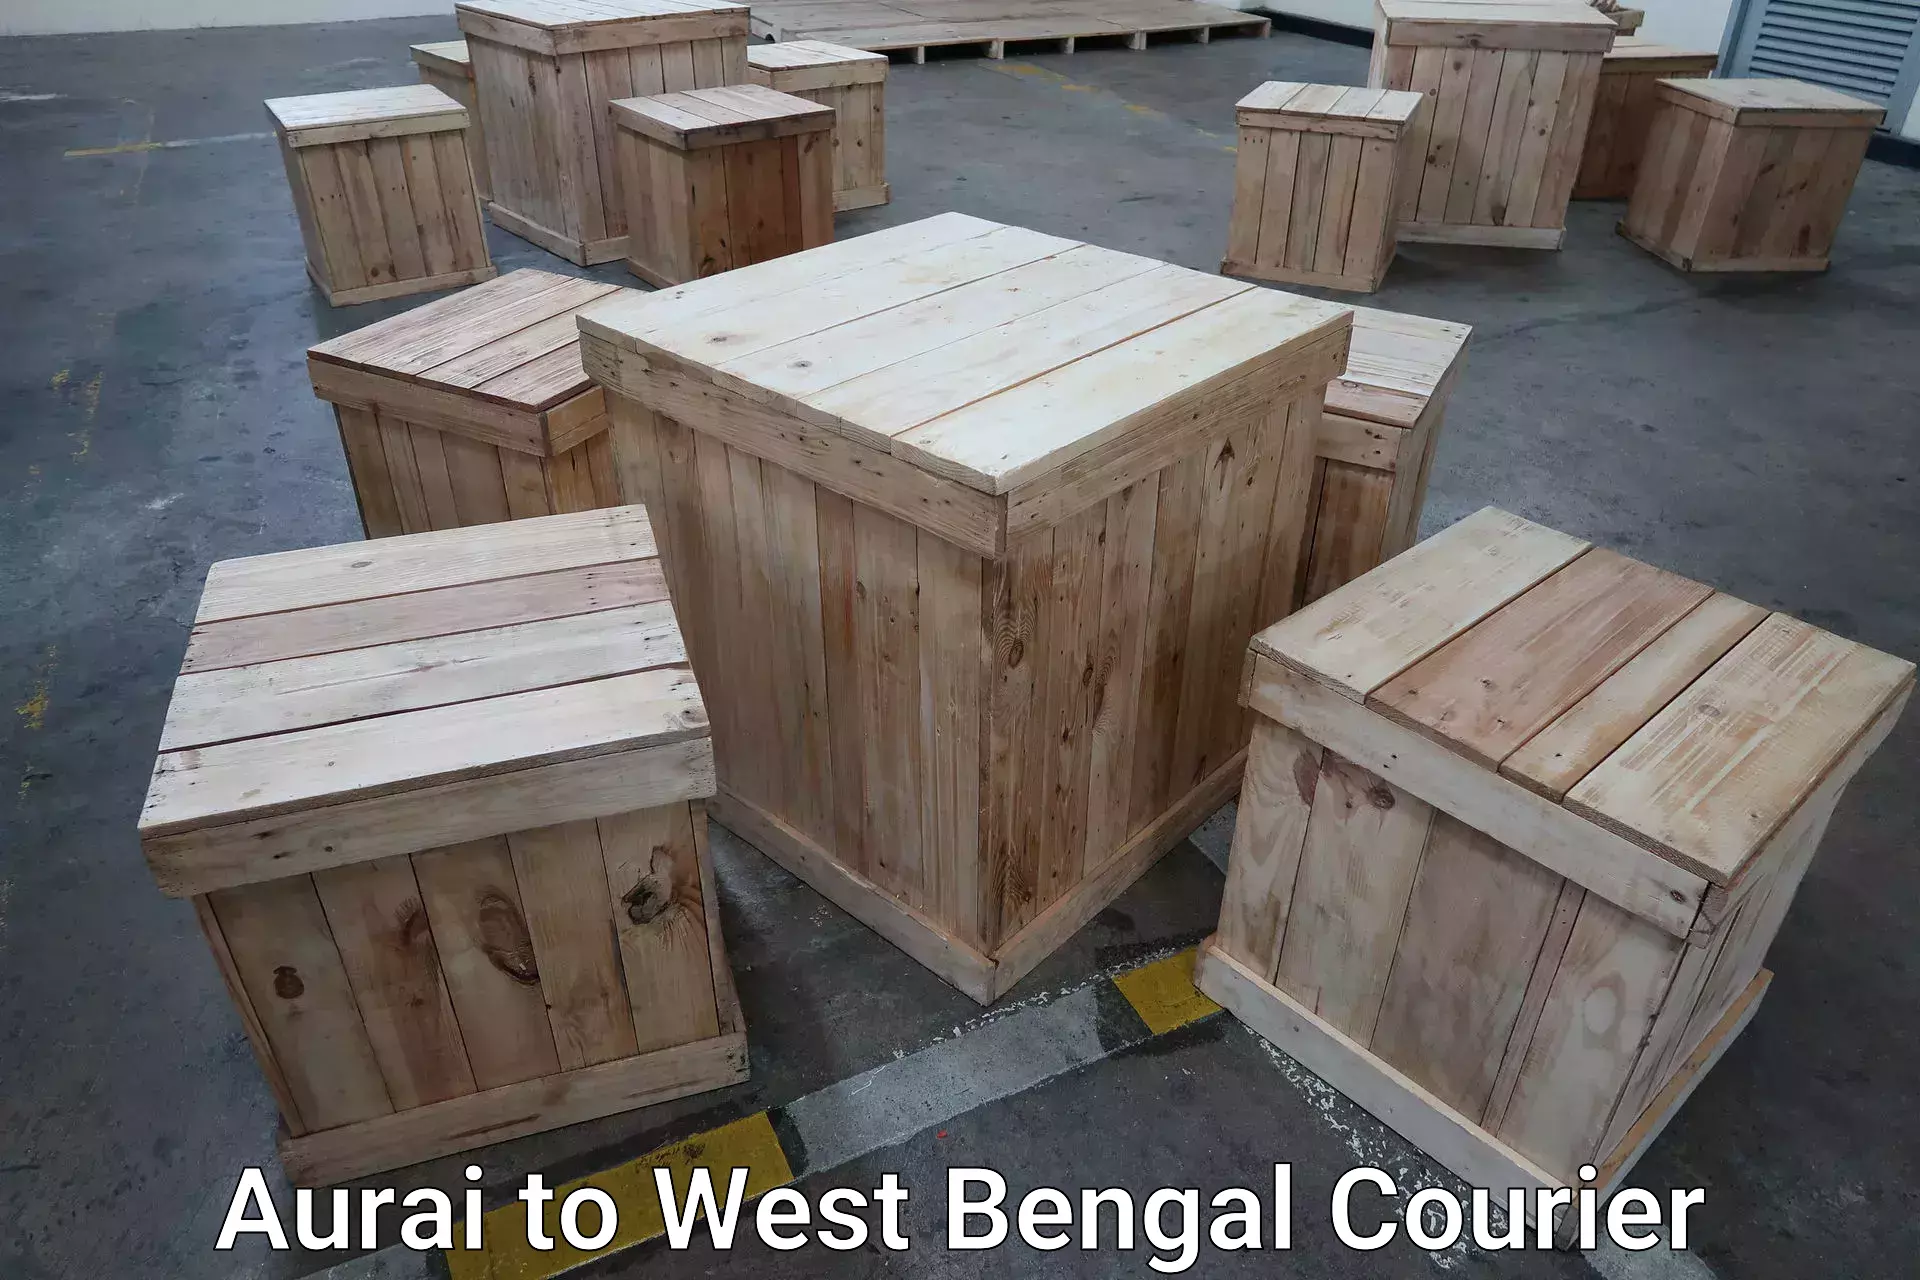 Luggage transport consulting Aurai to West Bengal